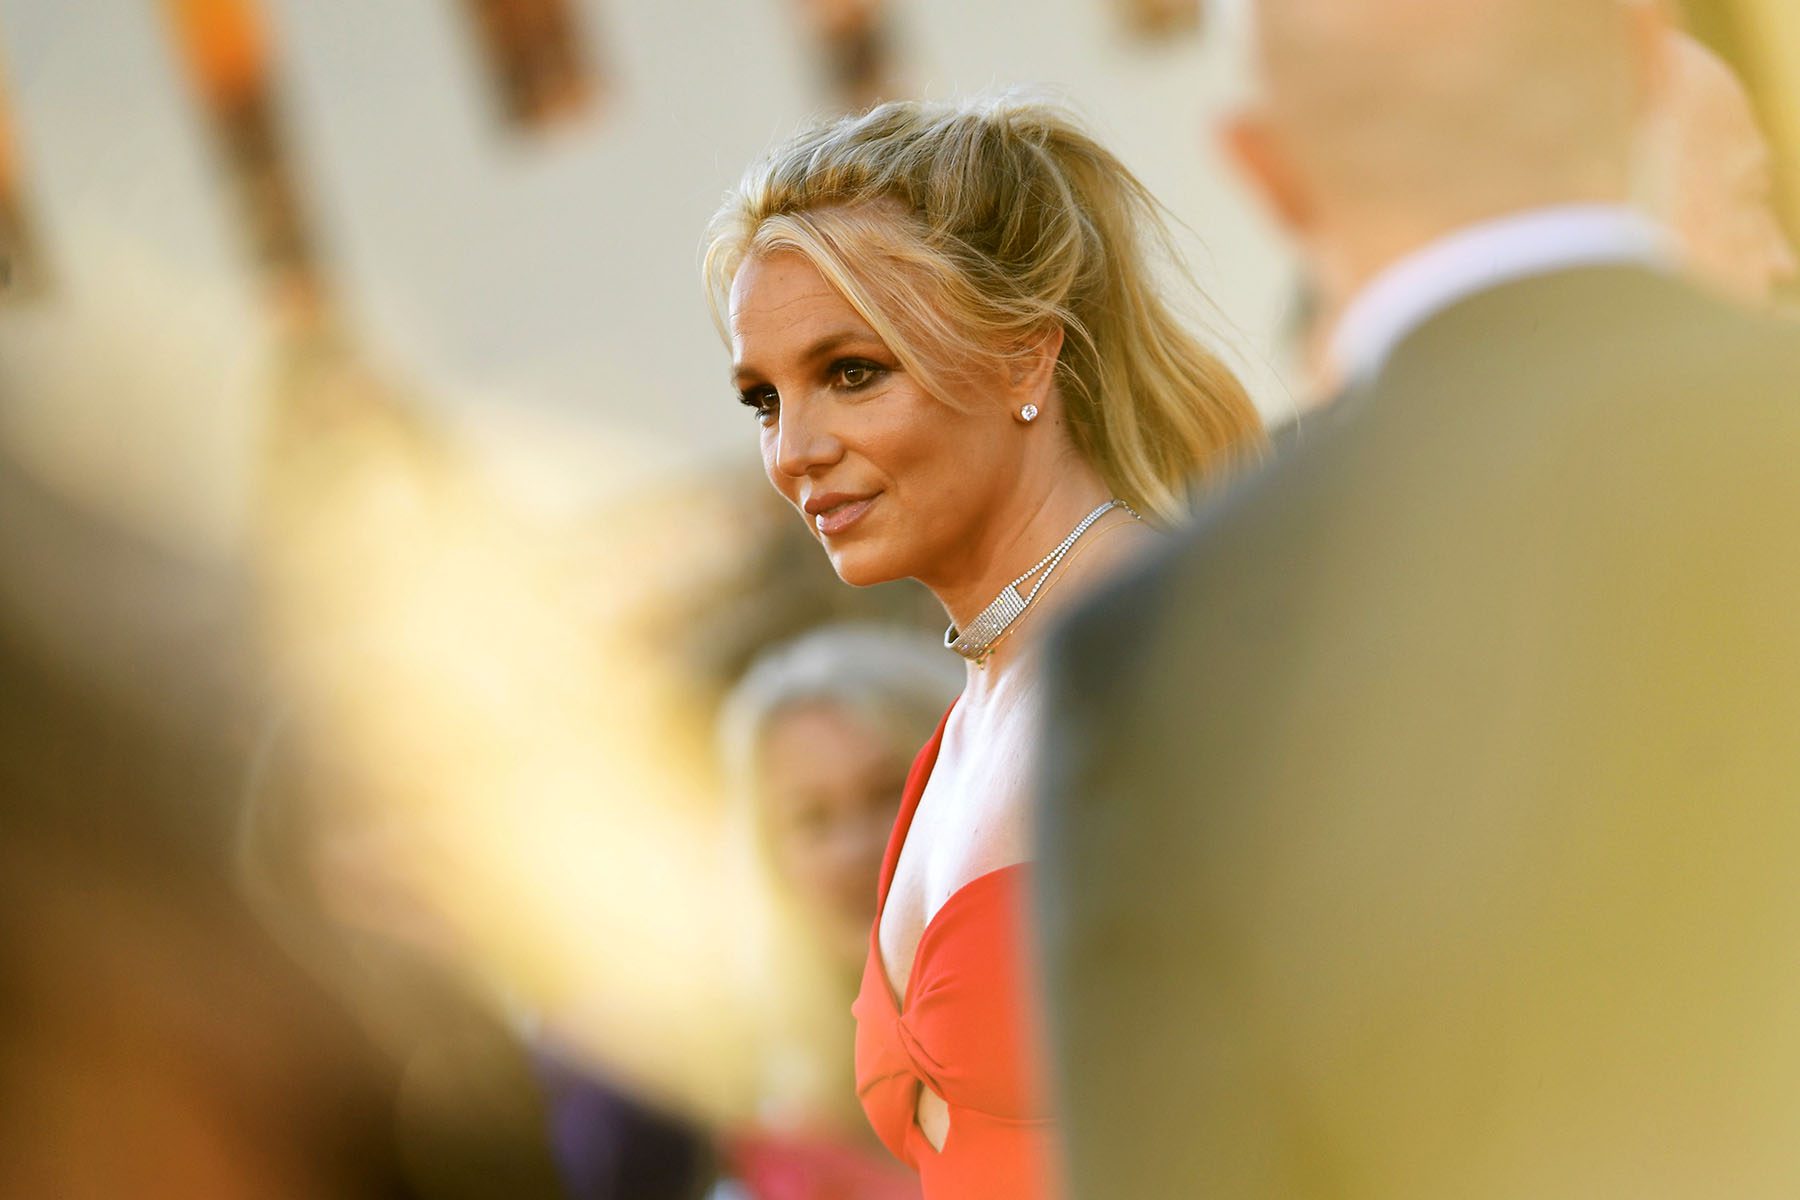 Britney Spears is seen wearing a red dress at a movie premiere.